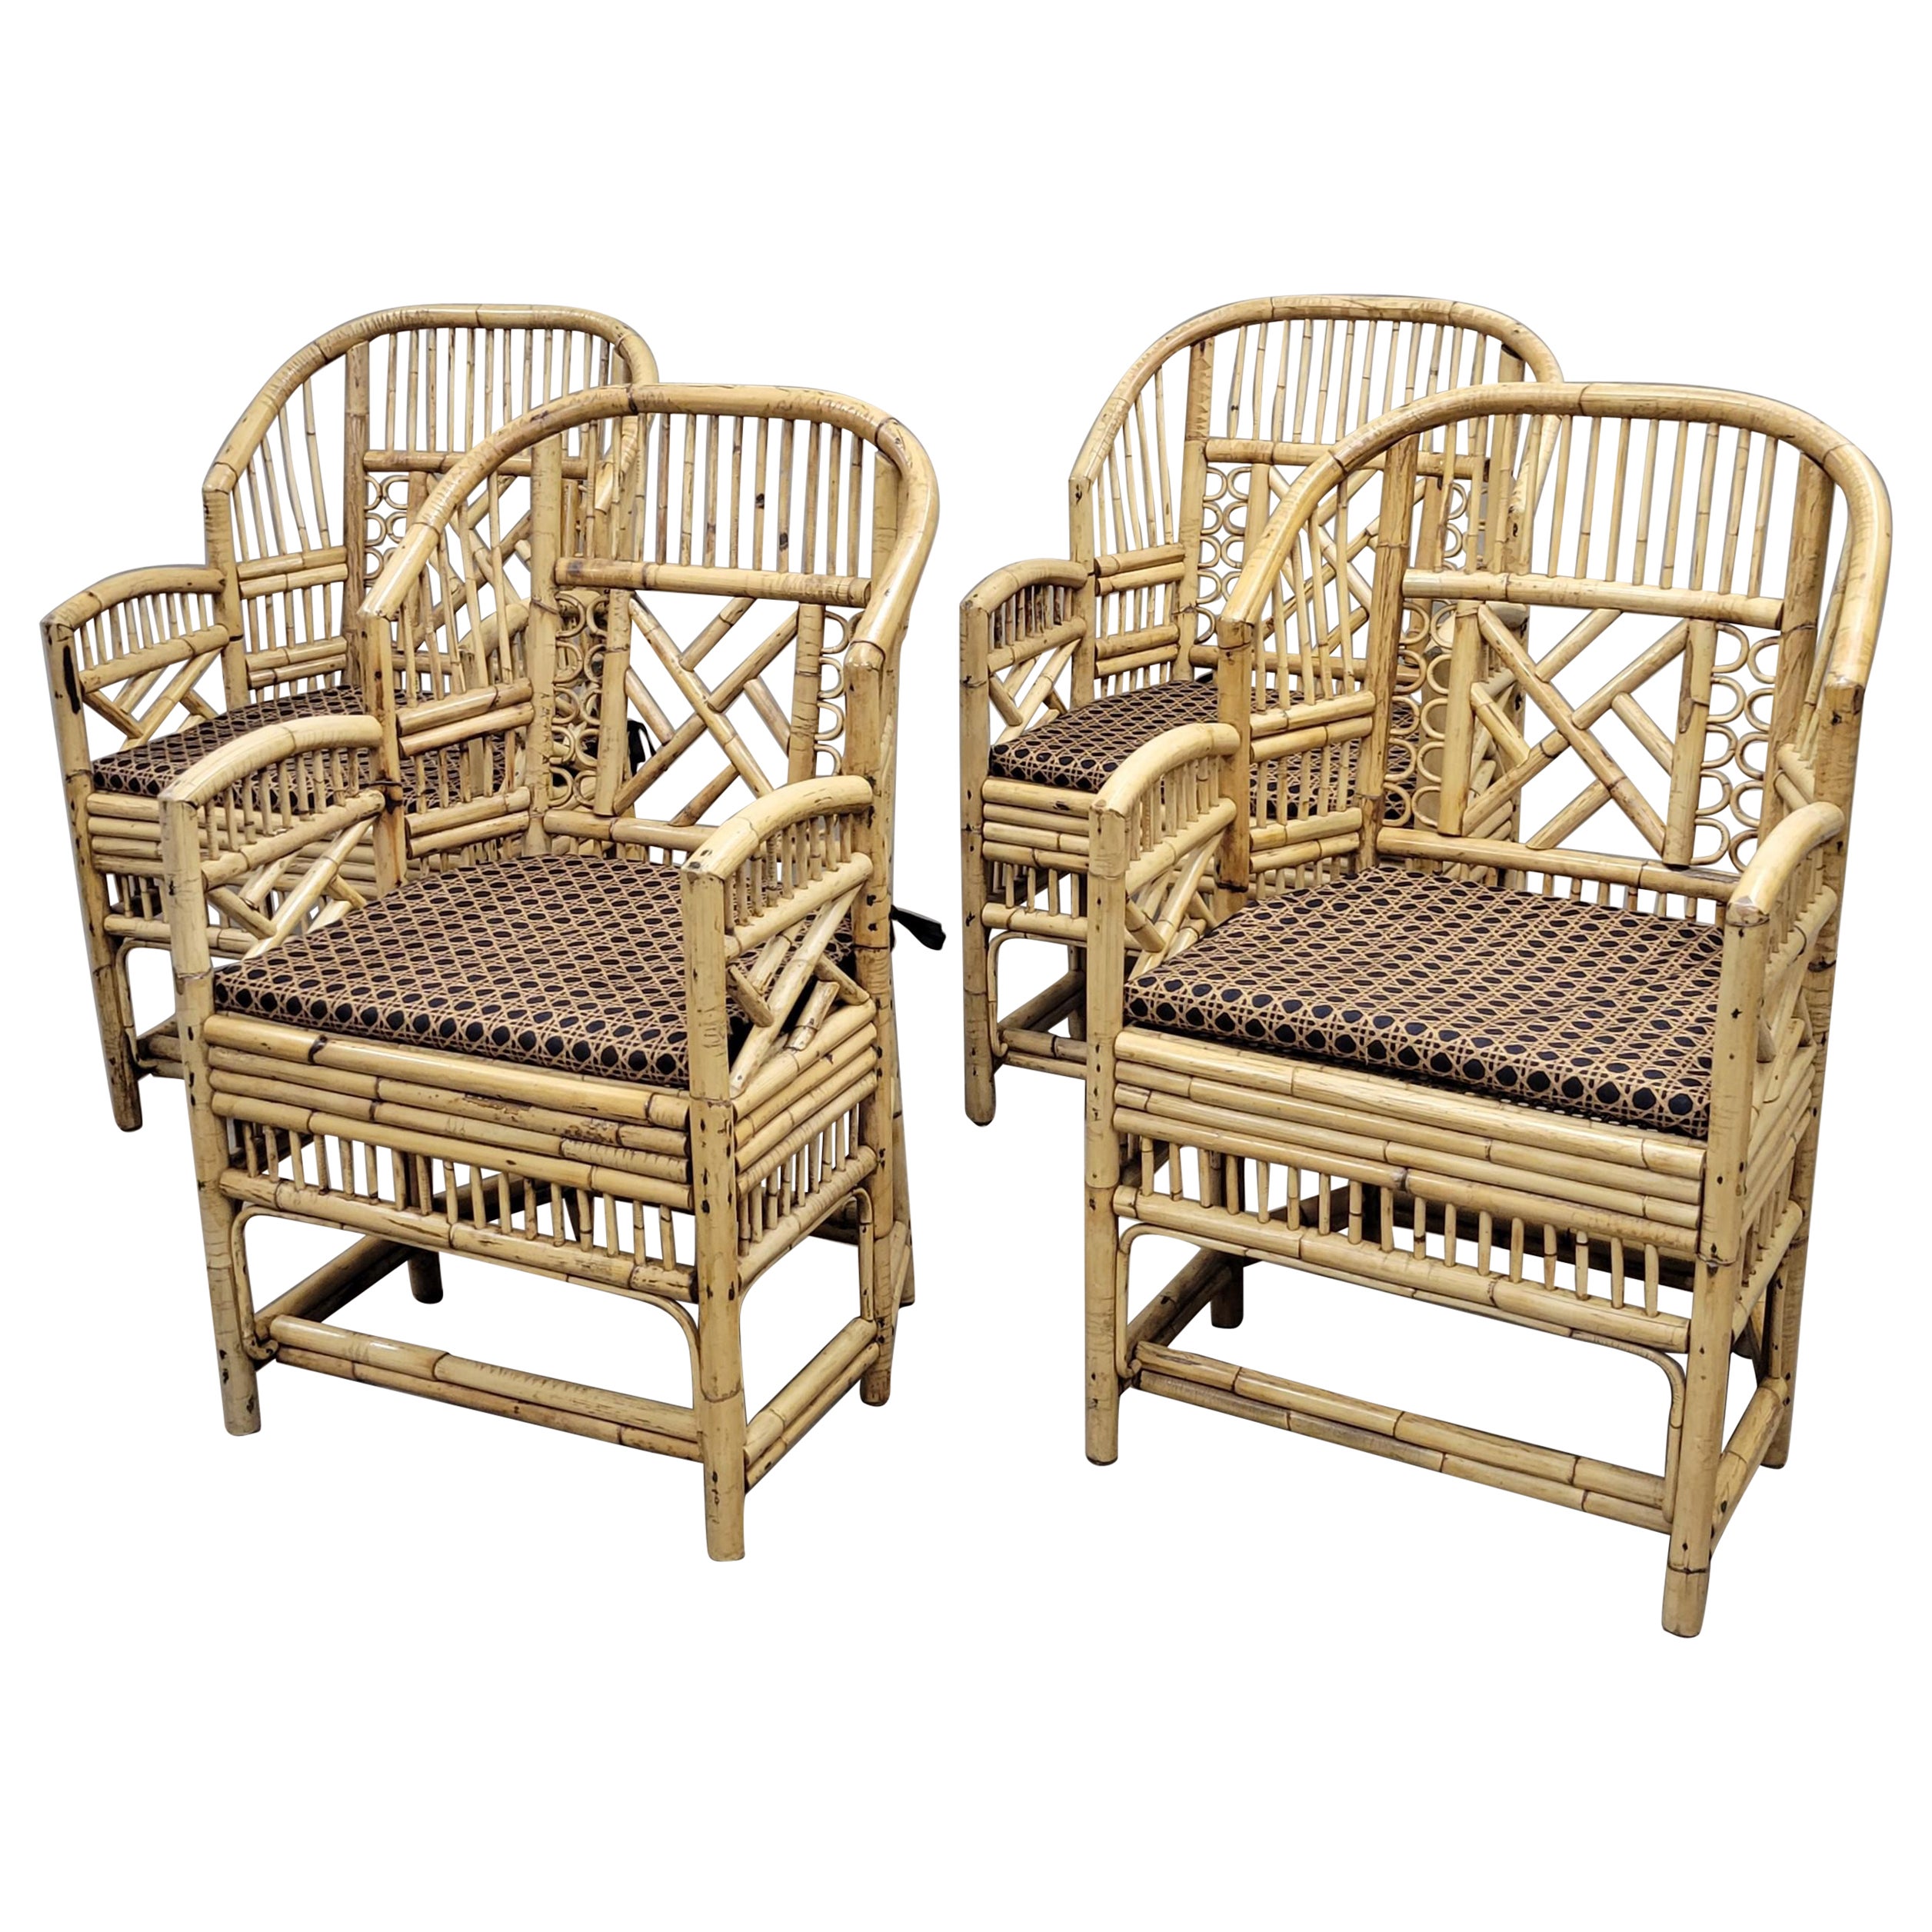 Vintage Brighton Pavilion Faux Bamboo Chairs With Kravet Cushions, Set of 4